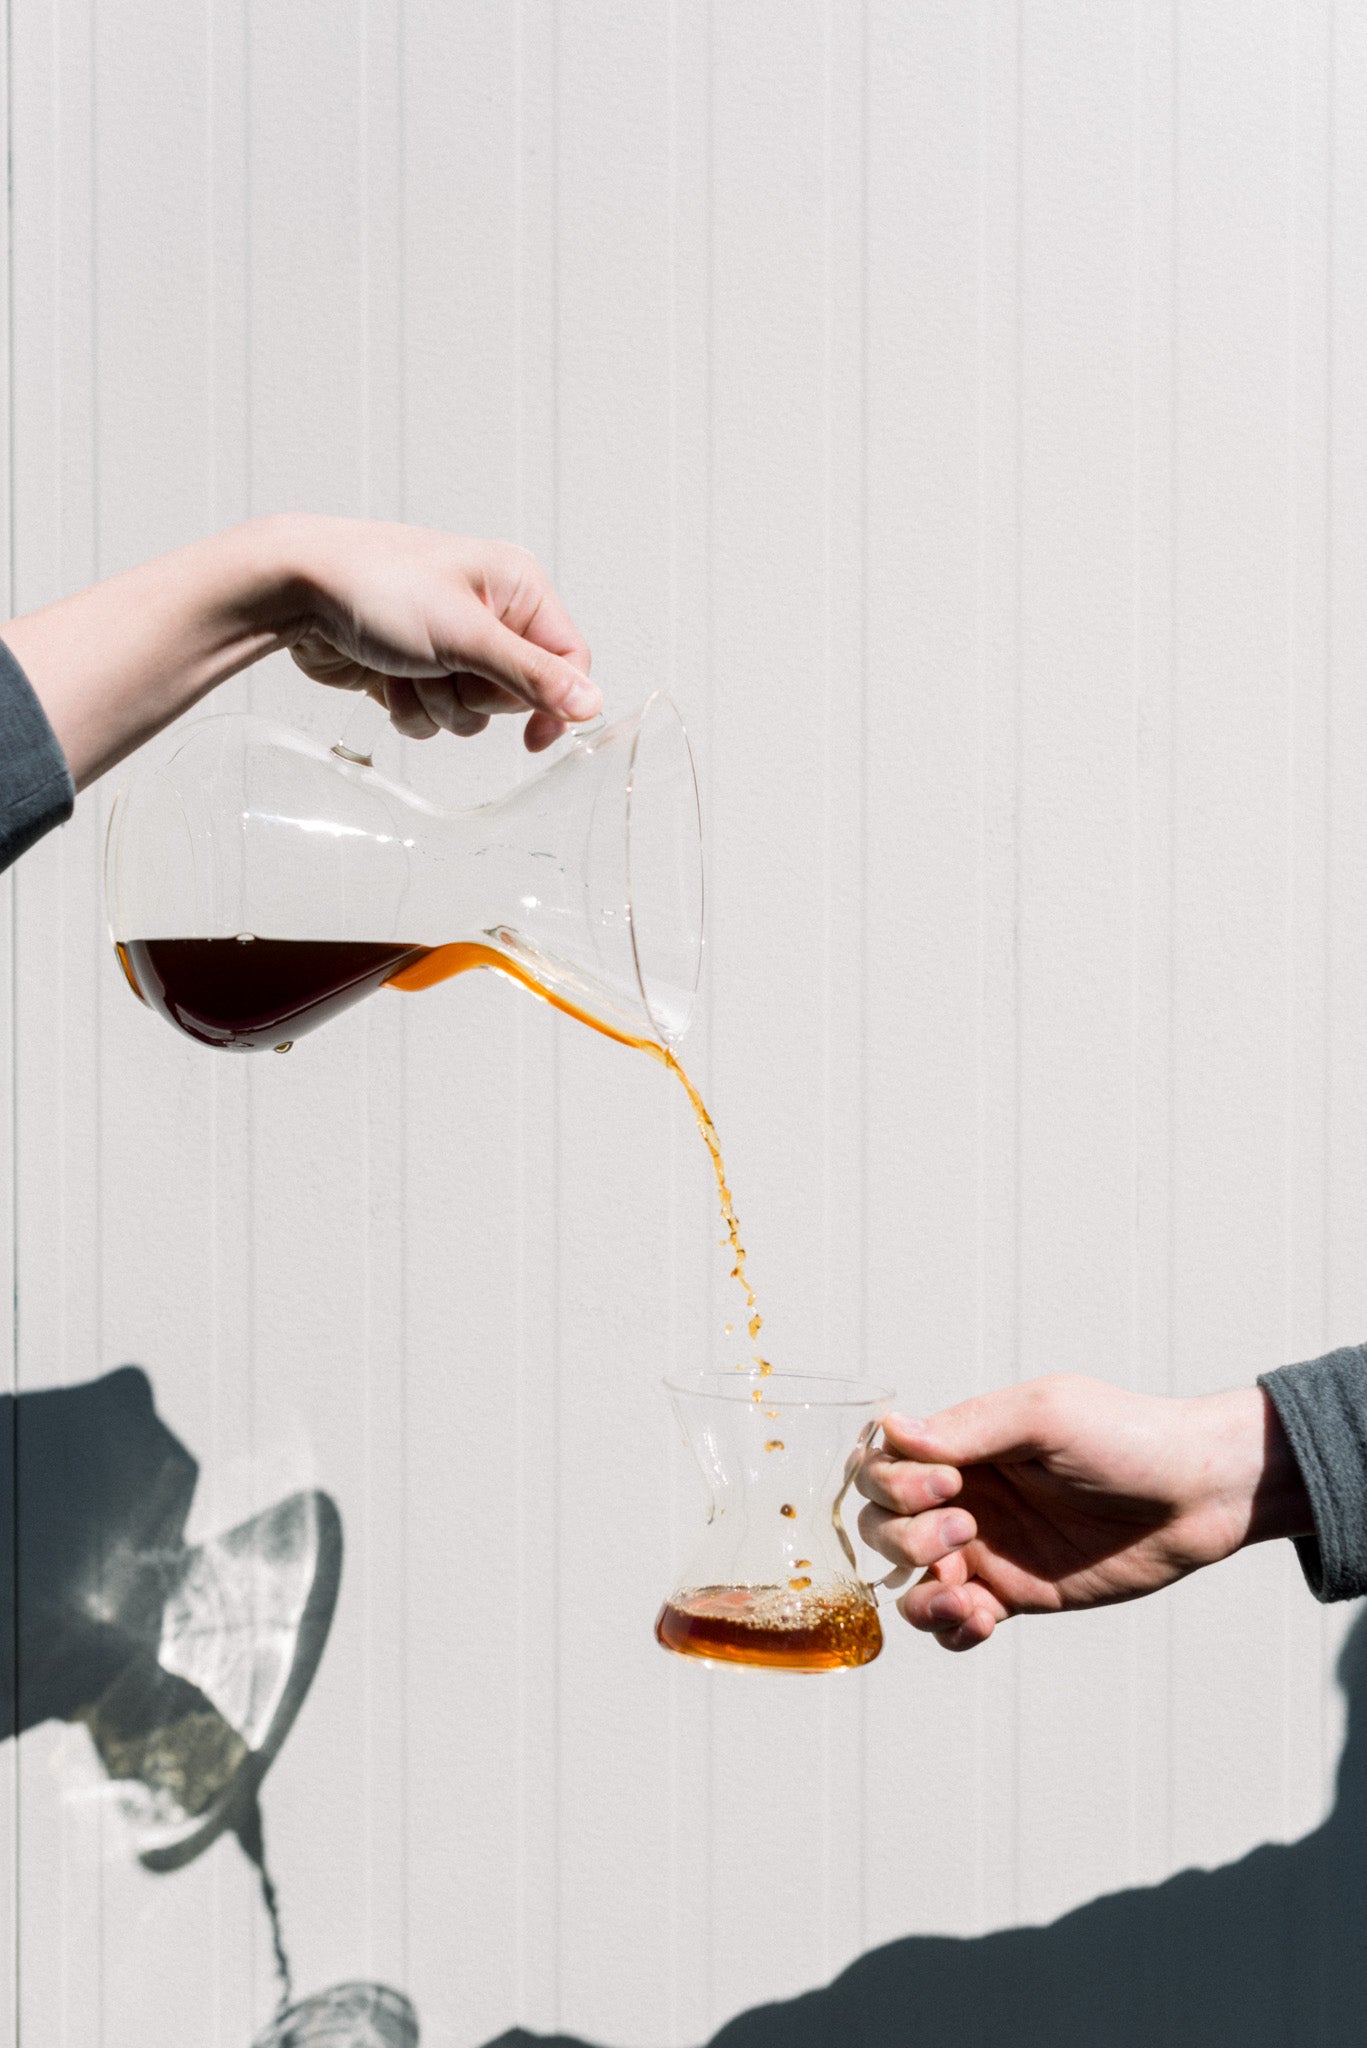 Coffee pouring from pitcher into smaller mug